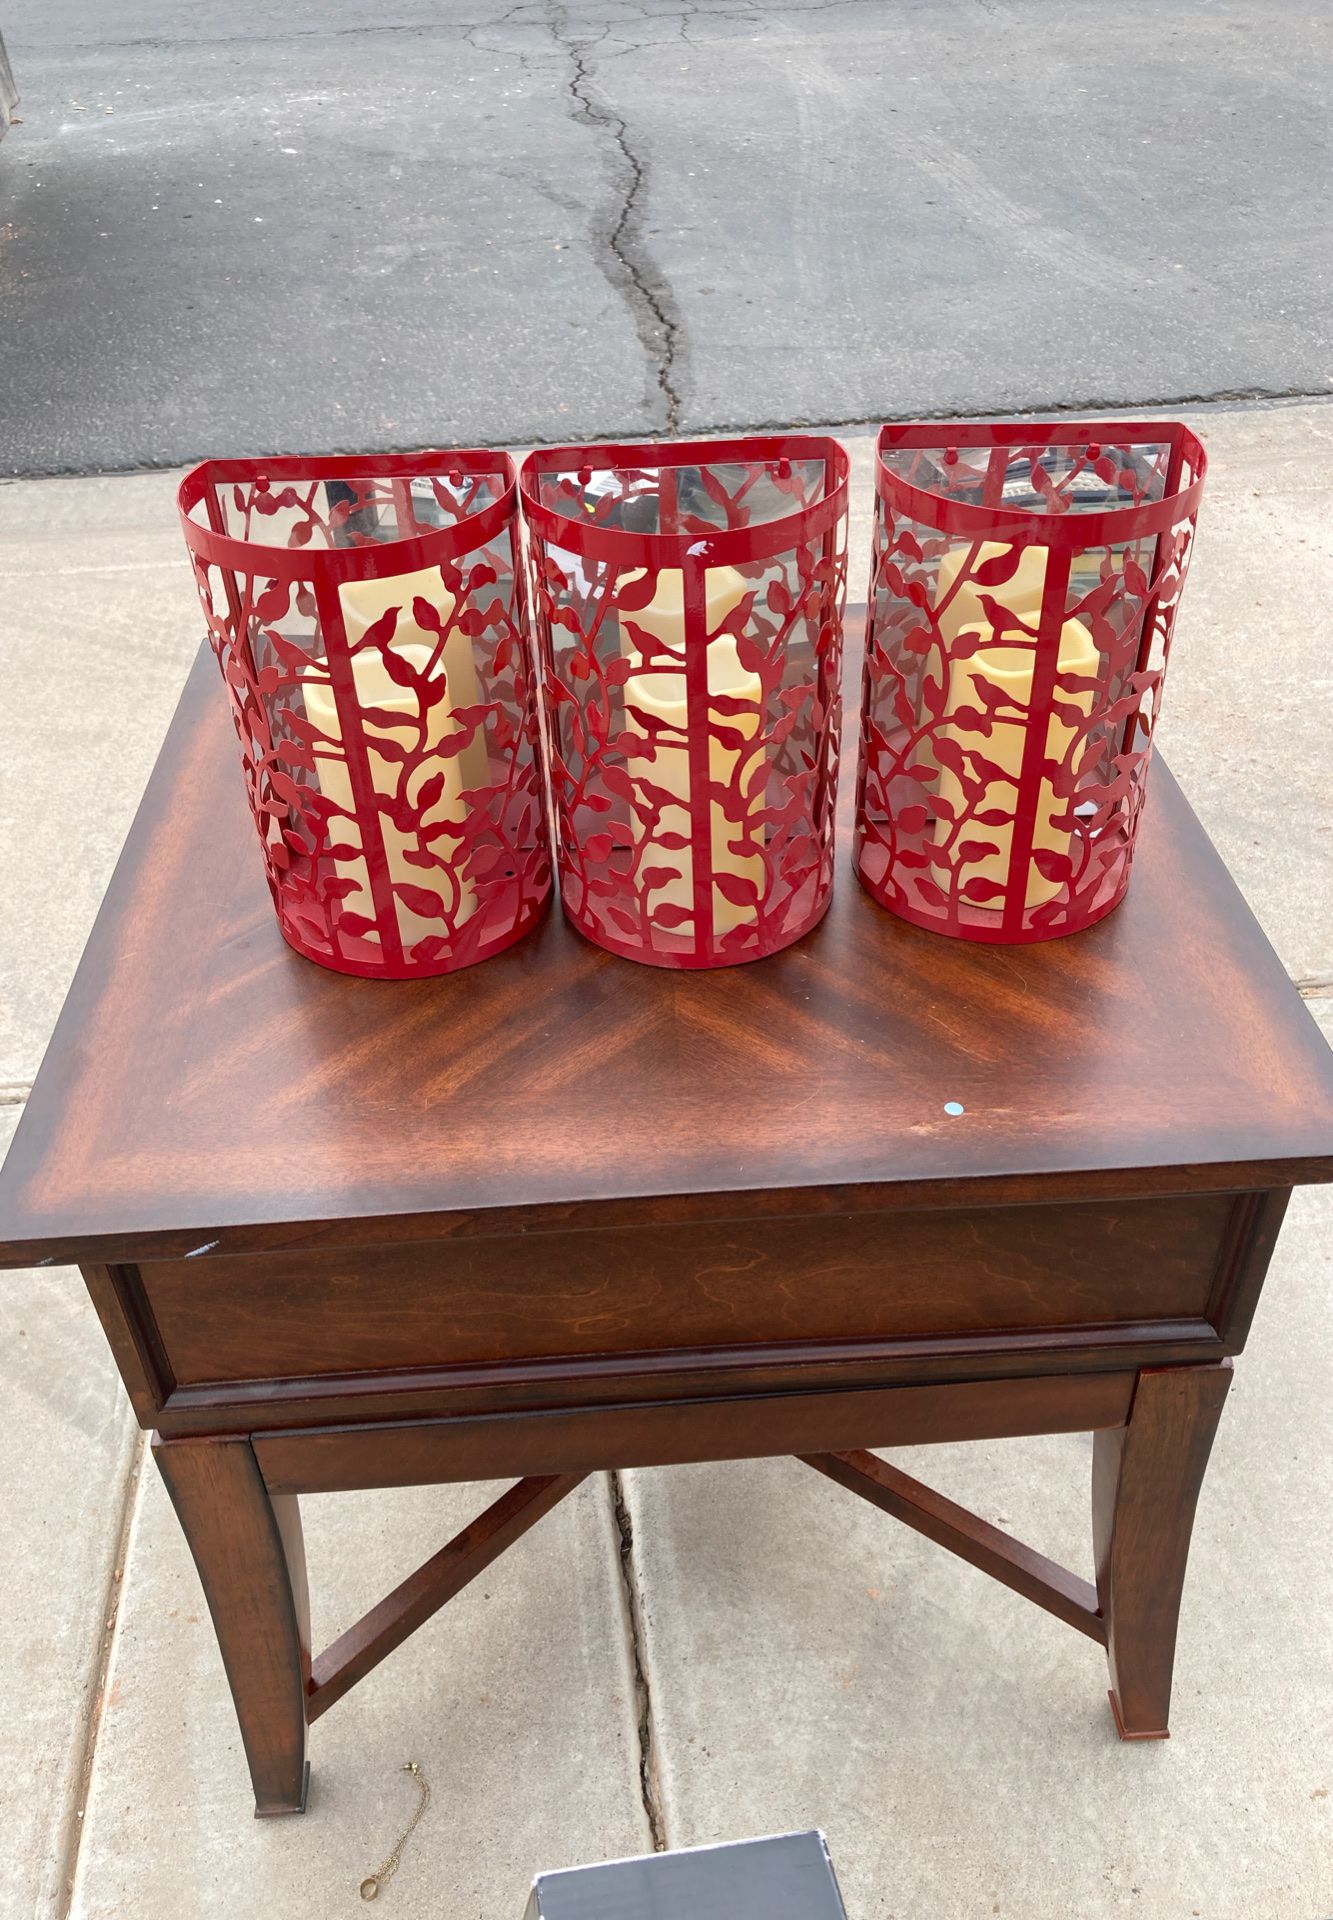 Three red candle sconce